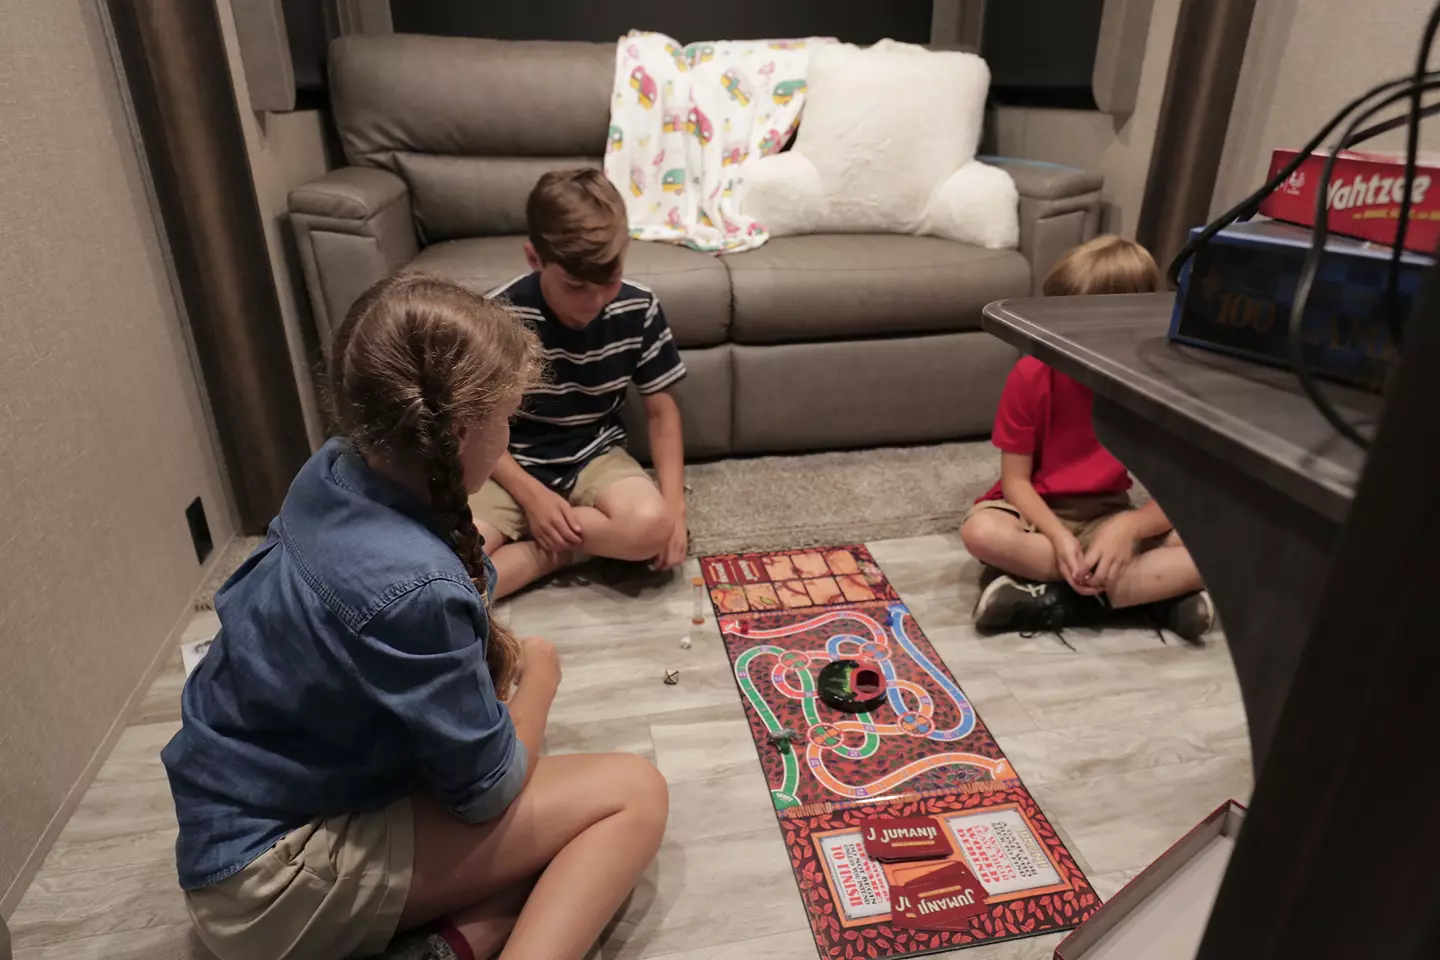 Children gathered on the floor playing a board game.